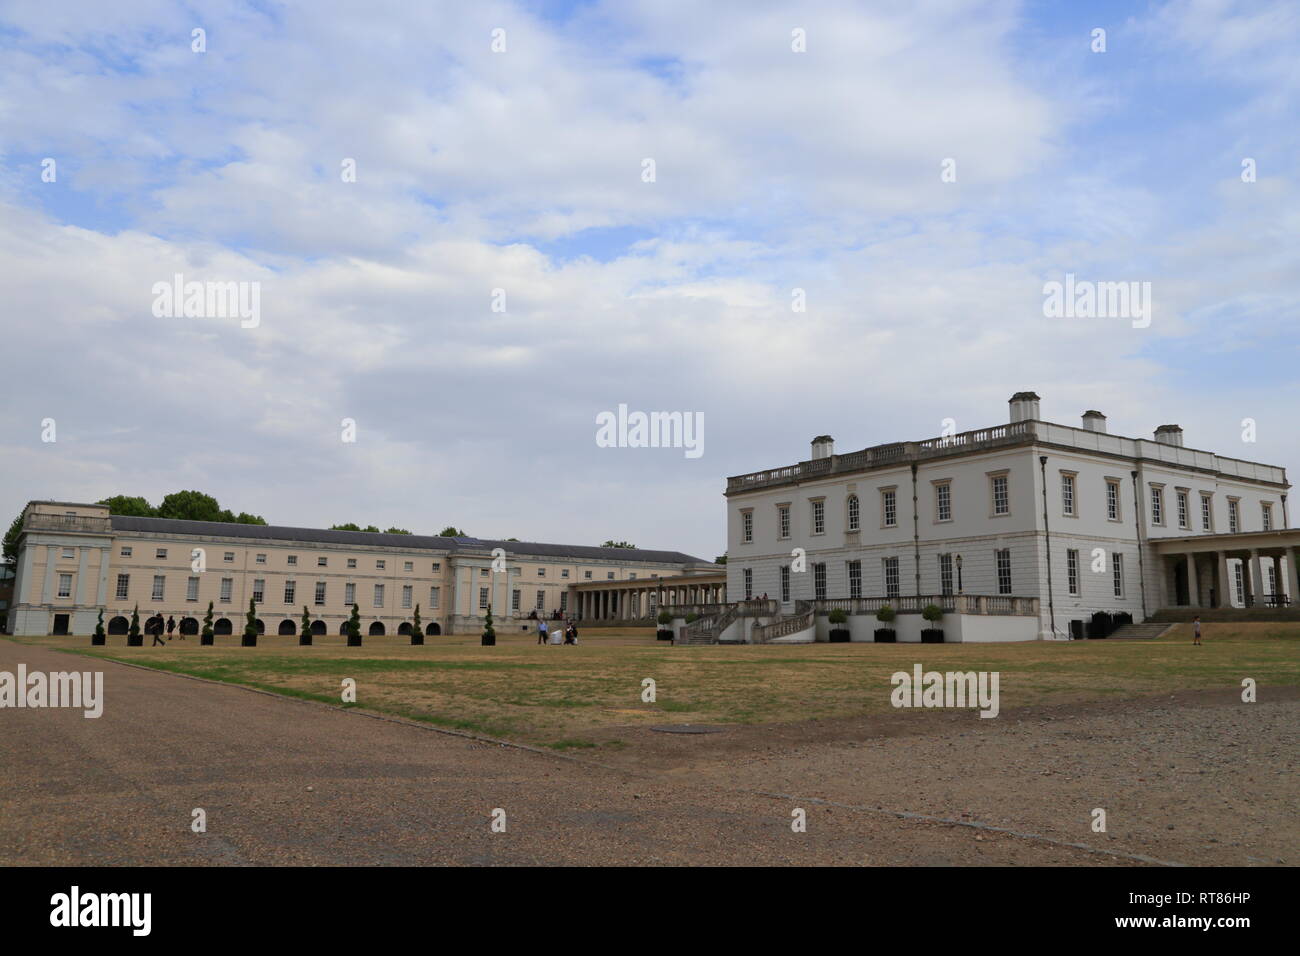 Various historical buildings, including the Queen's House that was designed by Inigo Jones, in Greenwich, London, United Kingdom. Stock Photo